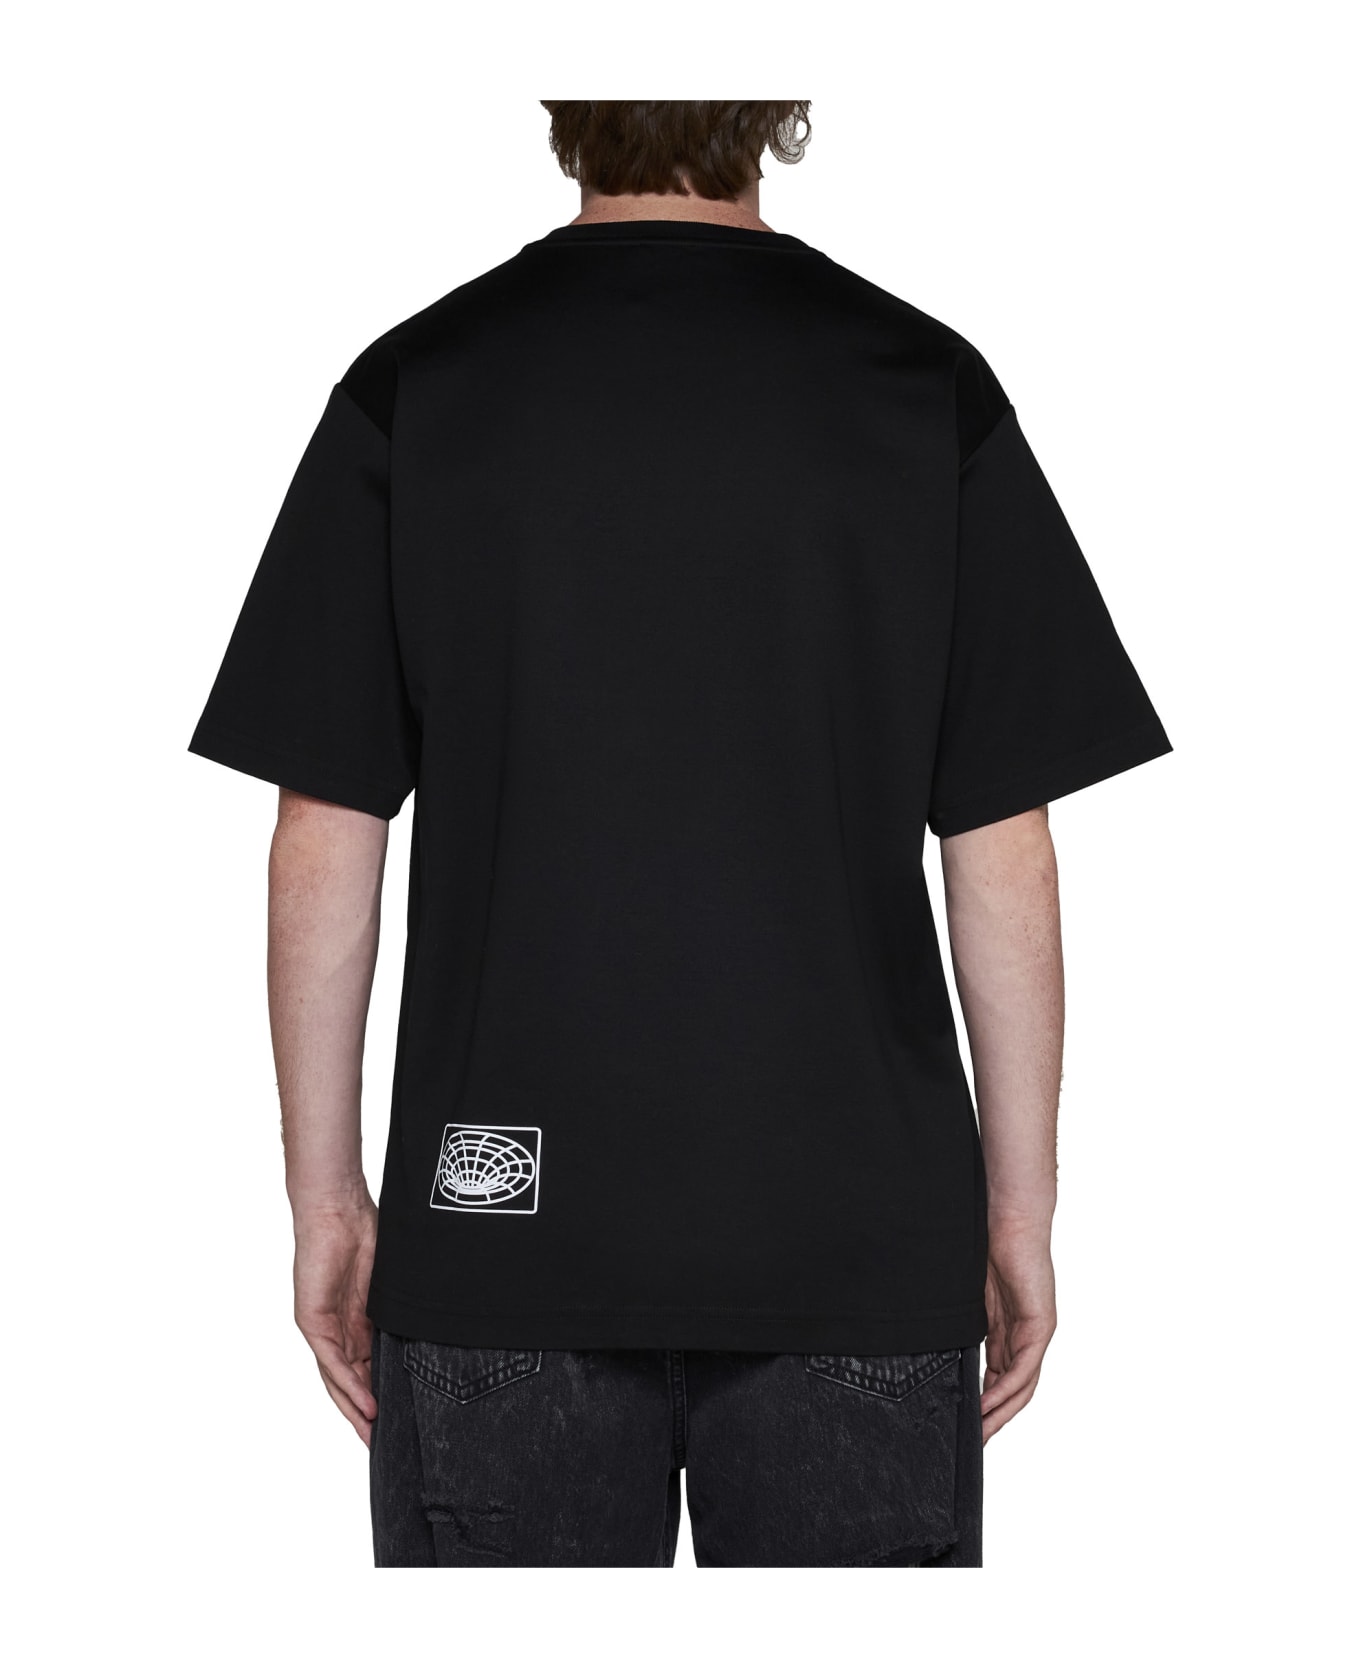 Dolce & Gabbana T-shirt With Embroidery And Prints - Nero シャツ